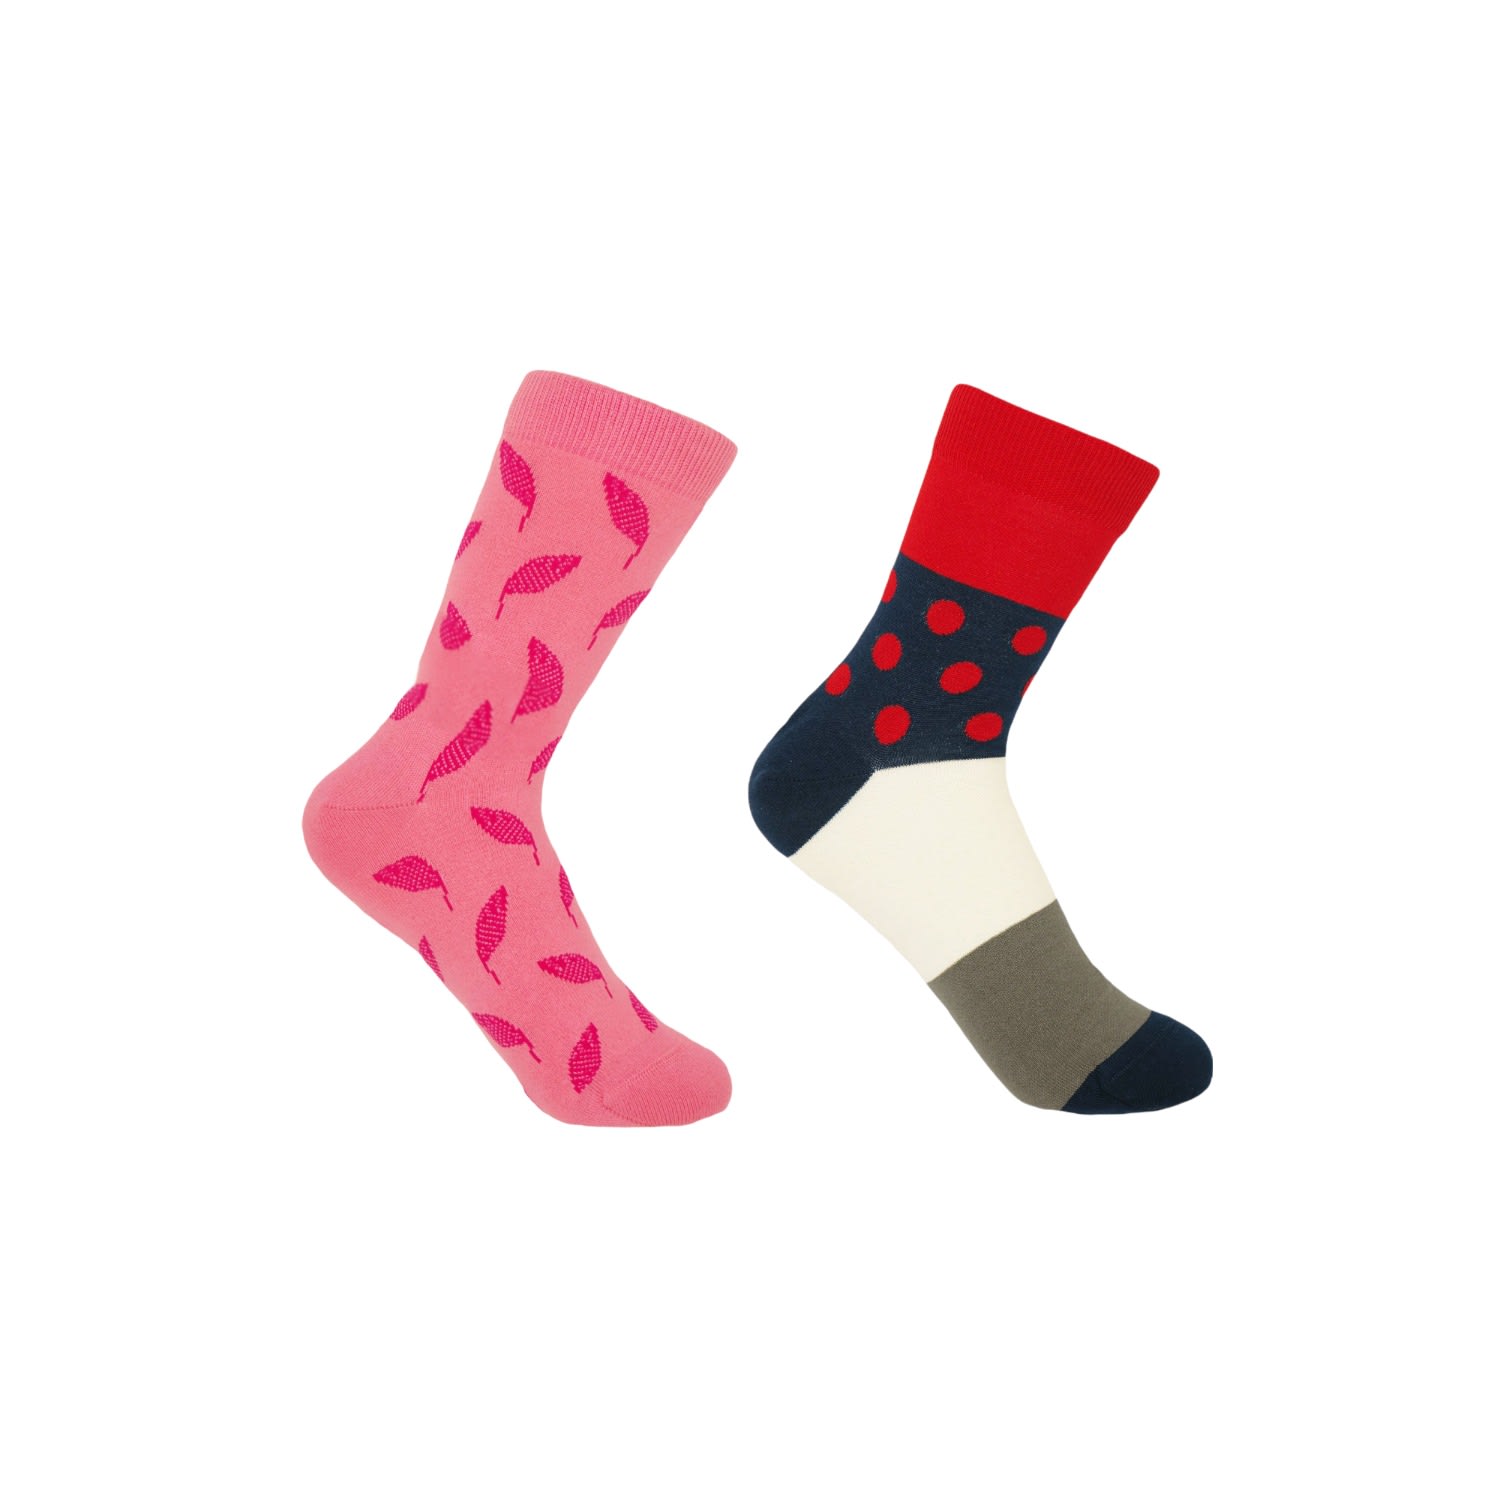 Pink Leaf & Scarlet Mayfair Women’s Socks Two Pack One Size Peper Harow - Made in England